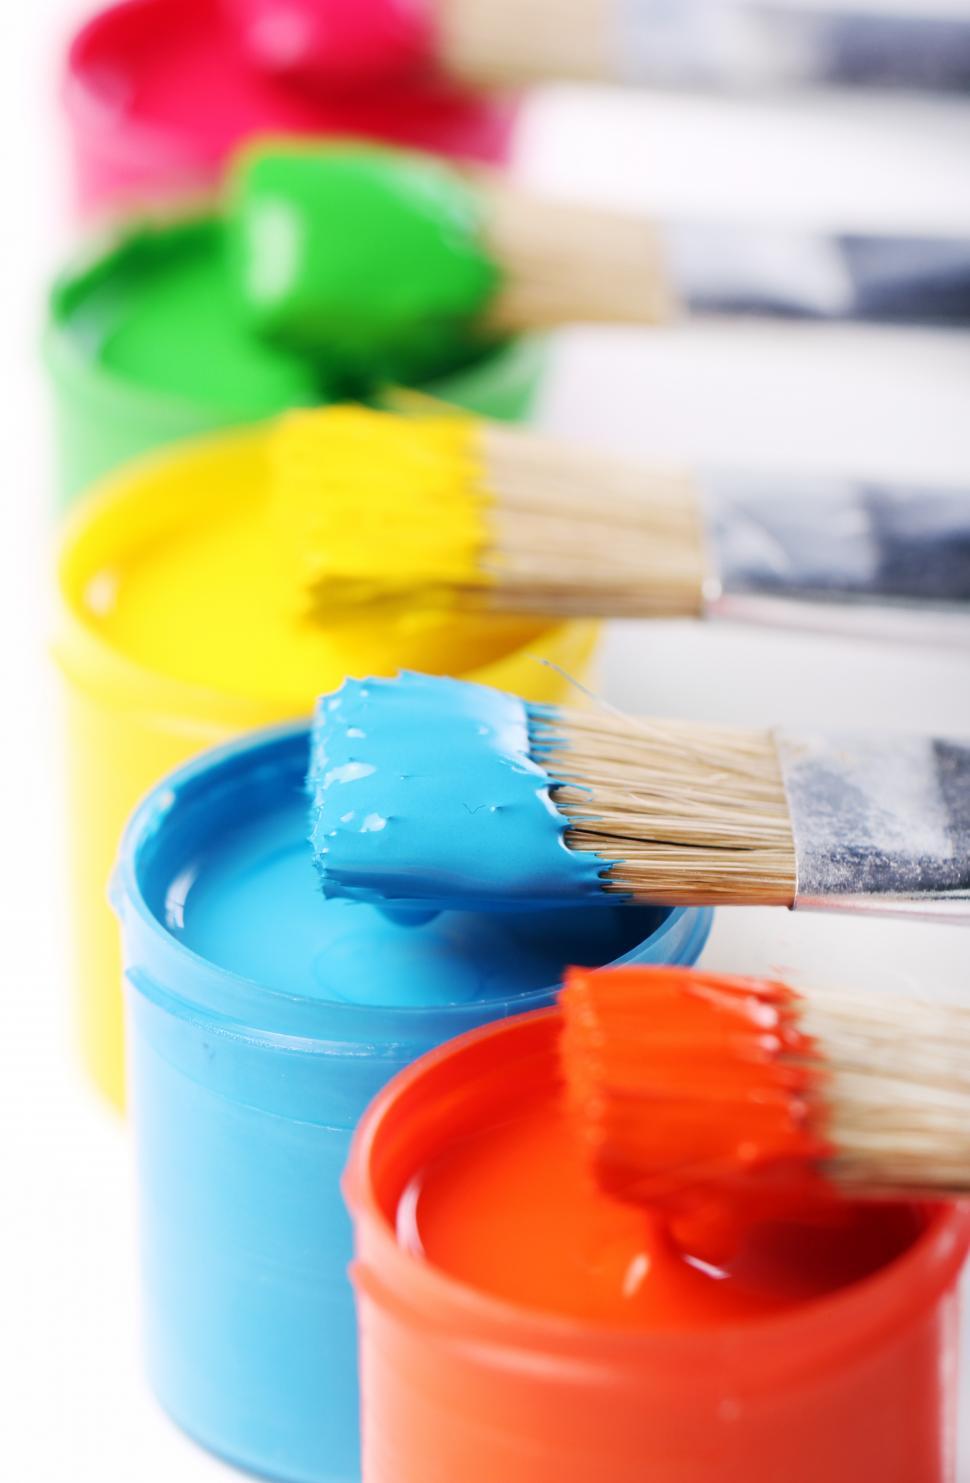 Download Free Stock Photo of Paint brushes dipped in colorful paint 